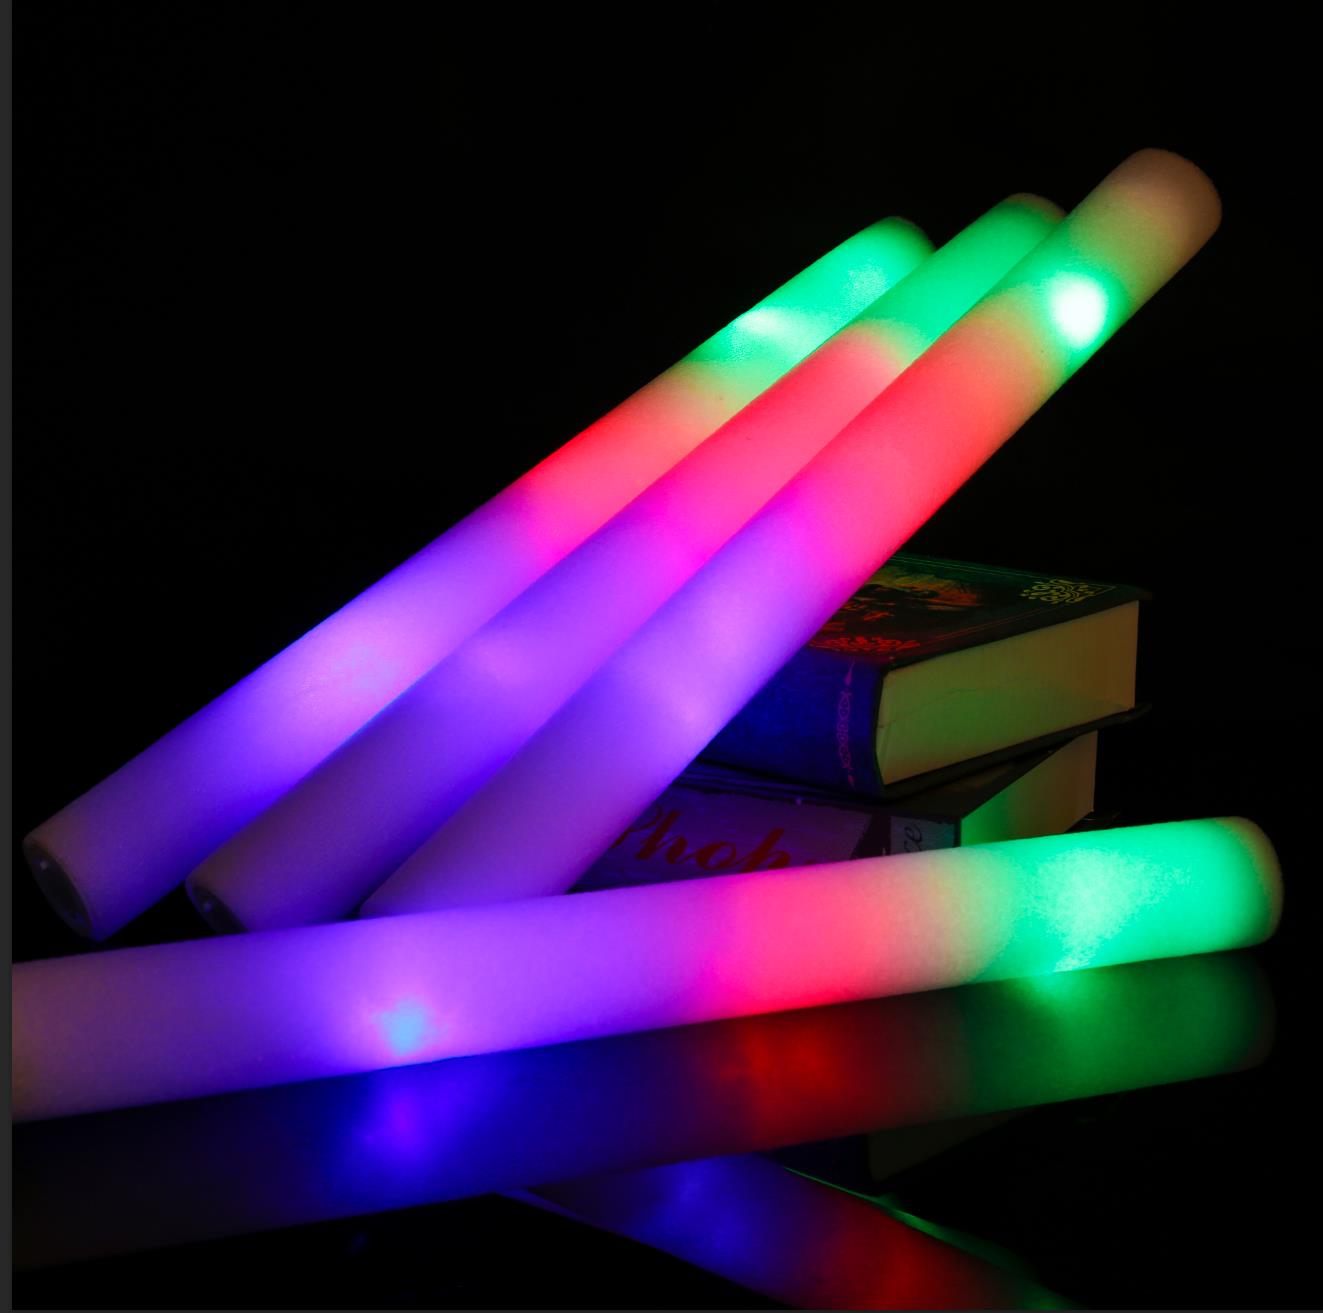 LED FOAM STICKS LED BATONS Lite Stix are the ultimate dance accessory to  light up the dance floor